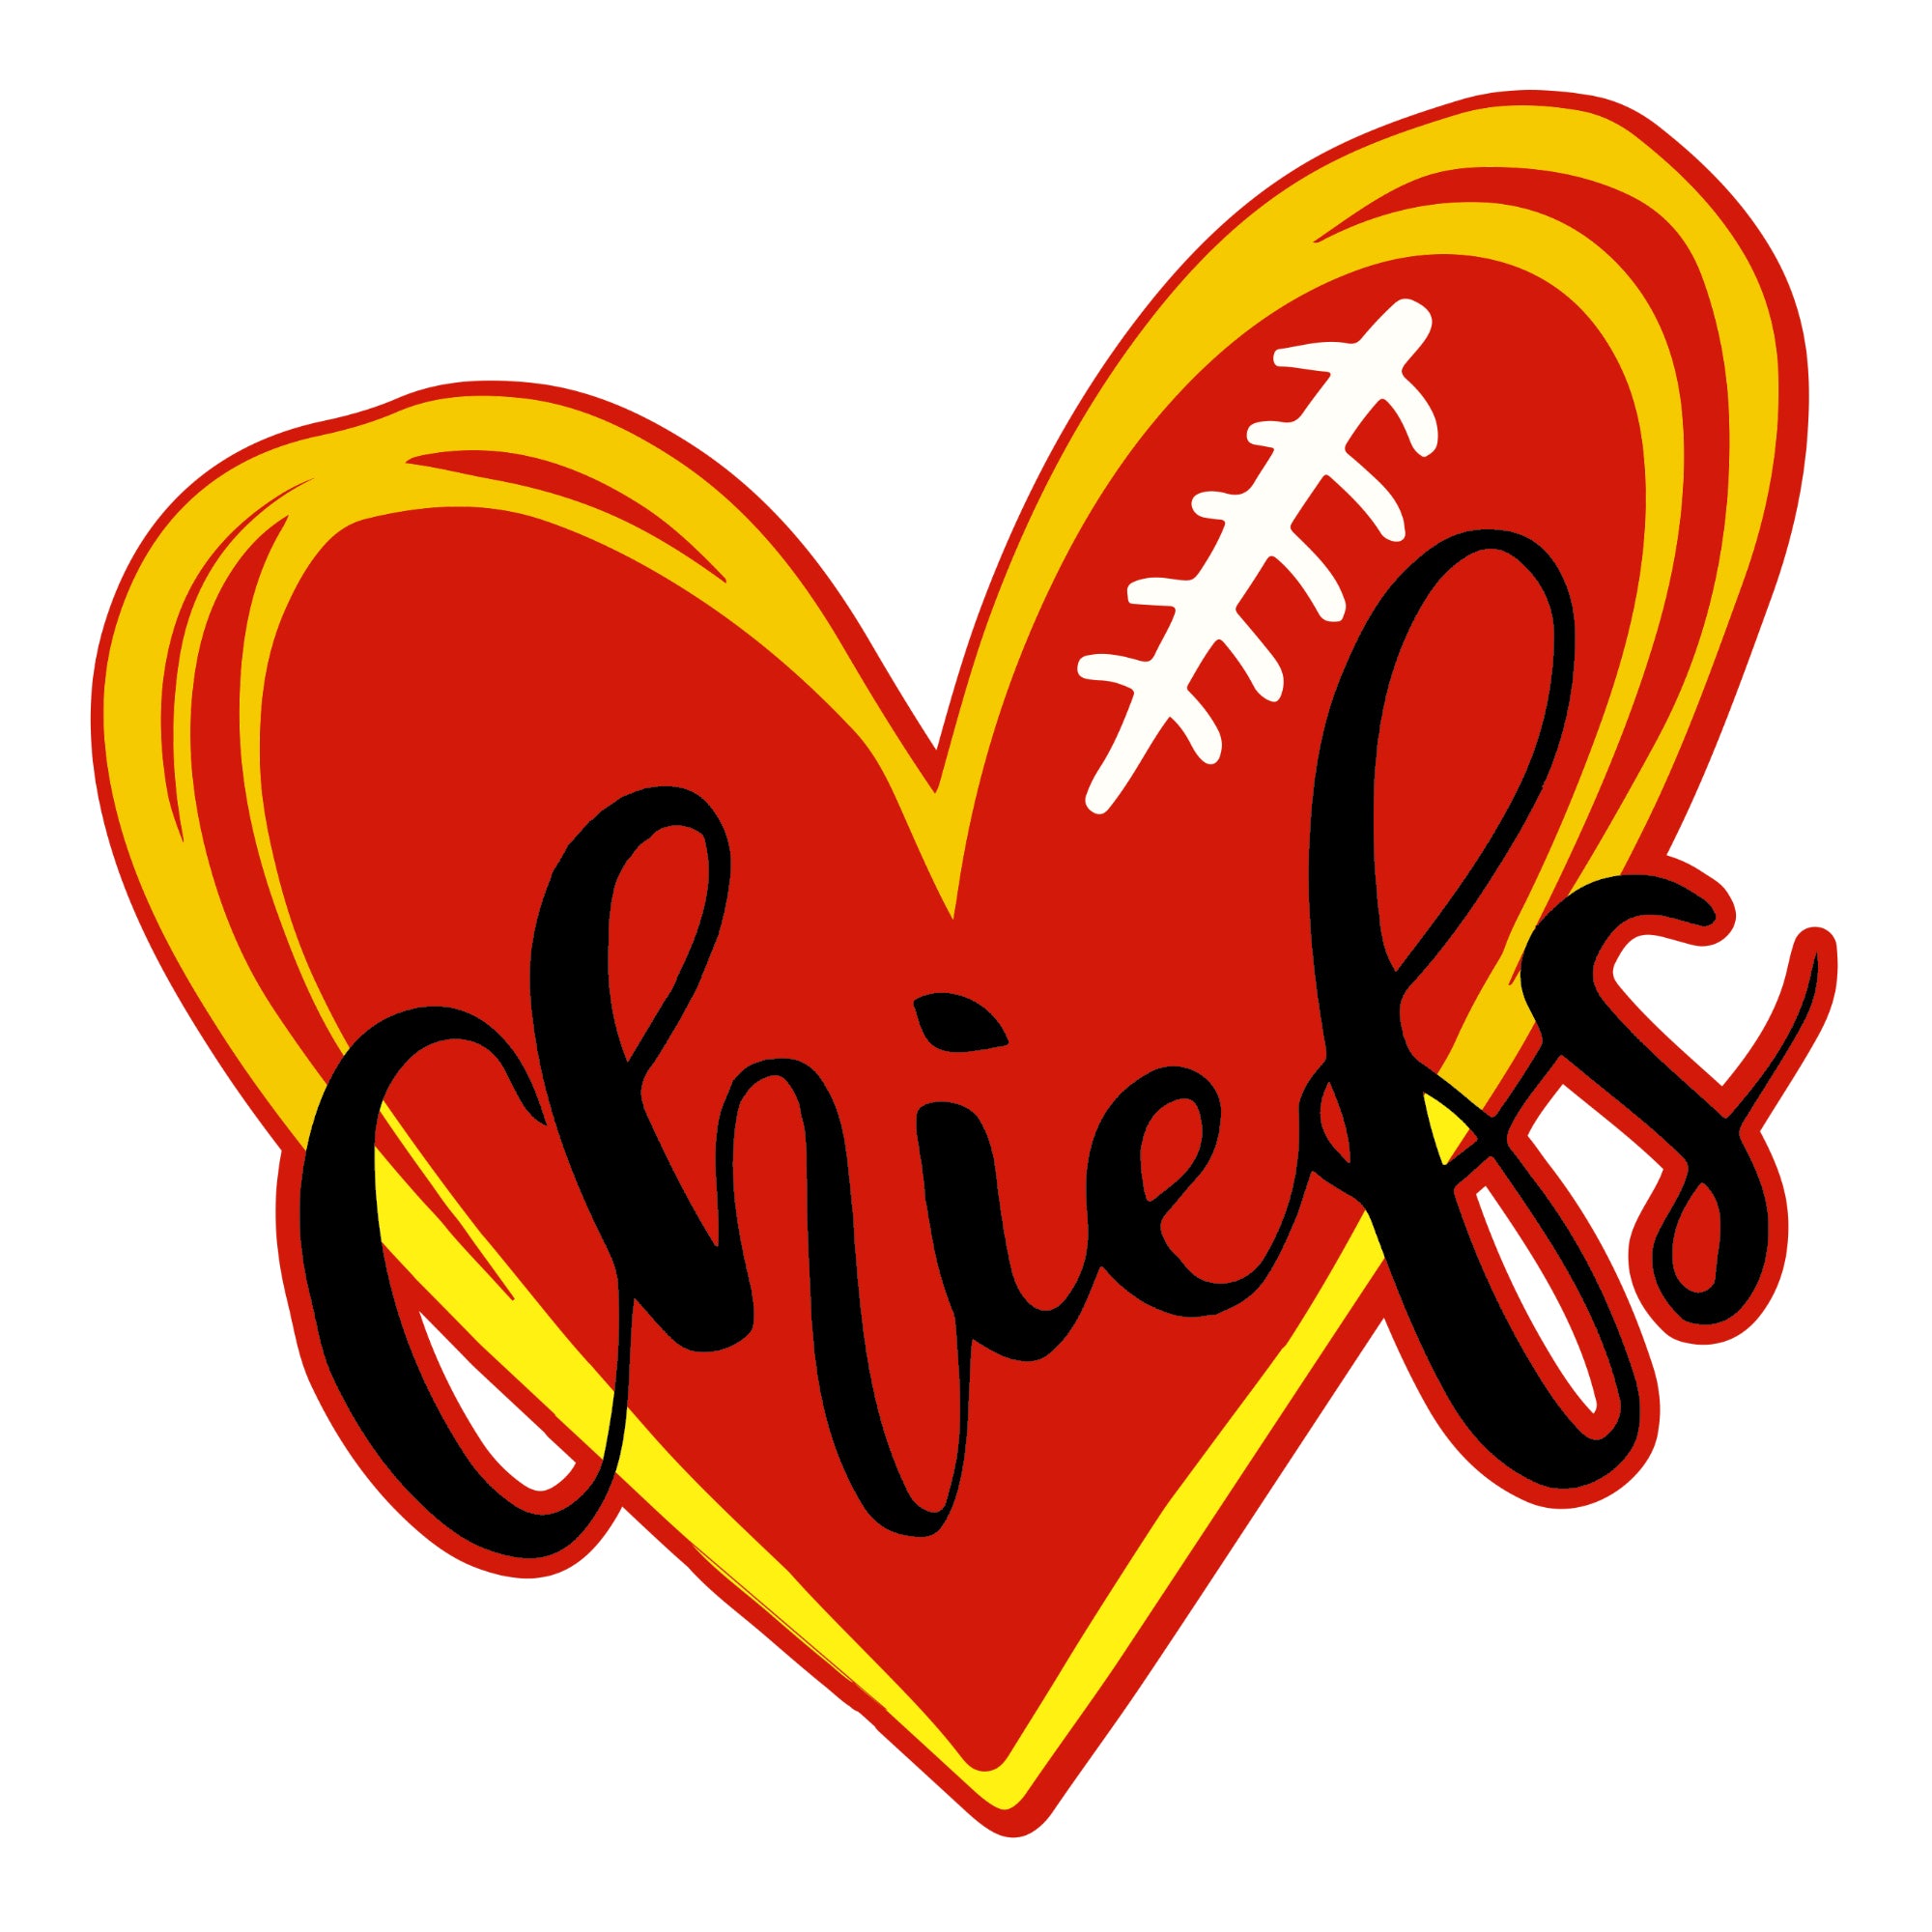 Sports Collection Love Chiefs 6.25 x 5.75 Fully-Assembled Laser Cut by SSC Laser Designs